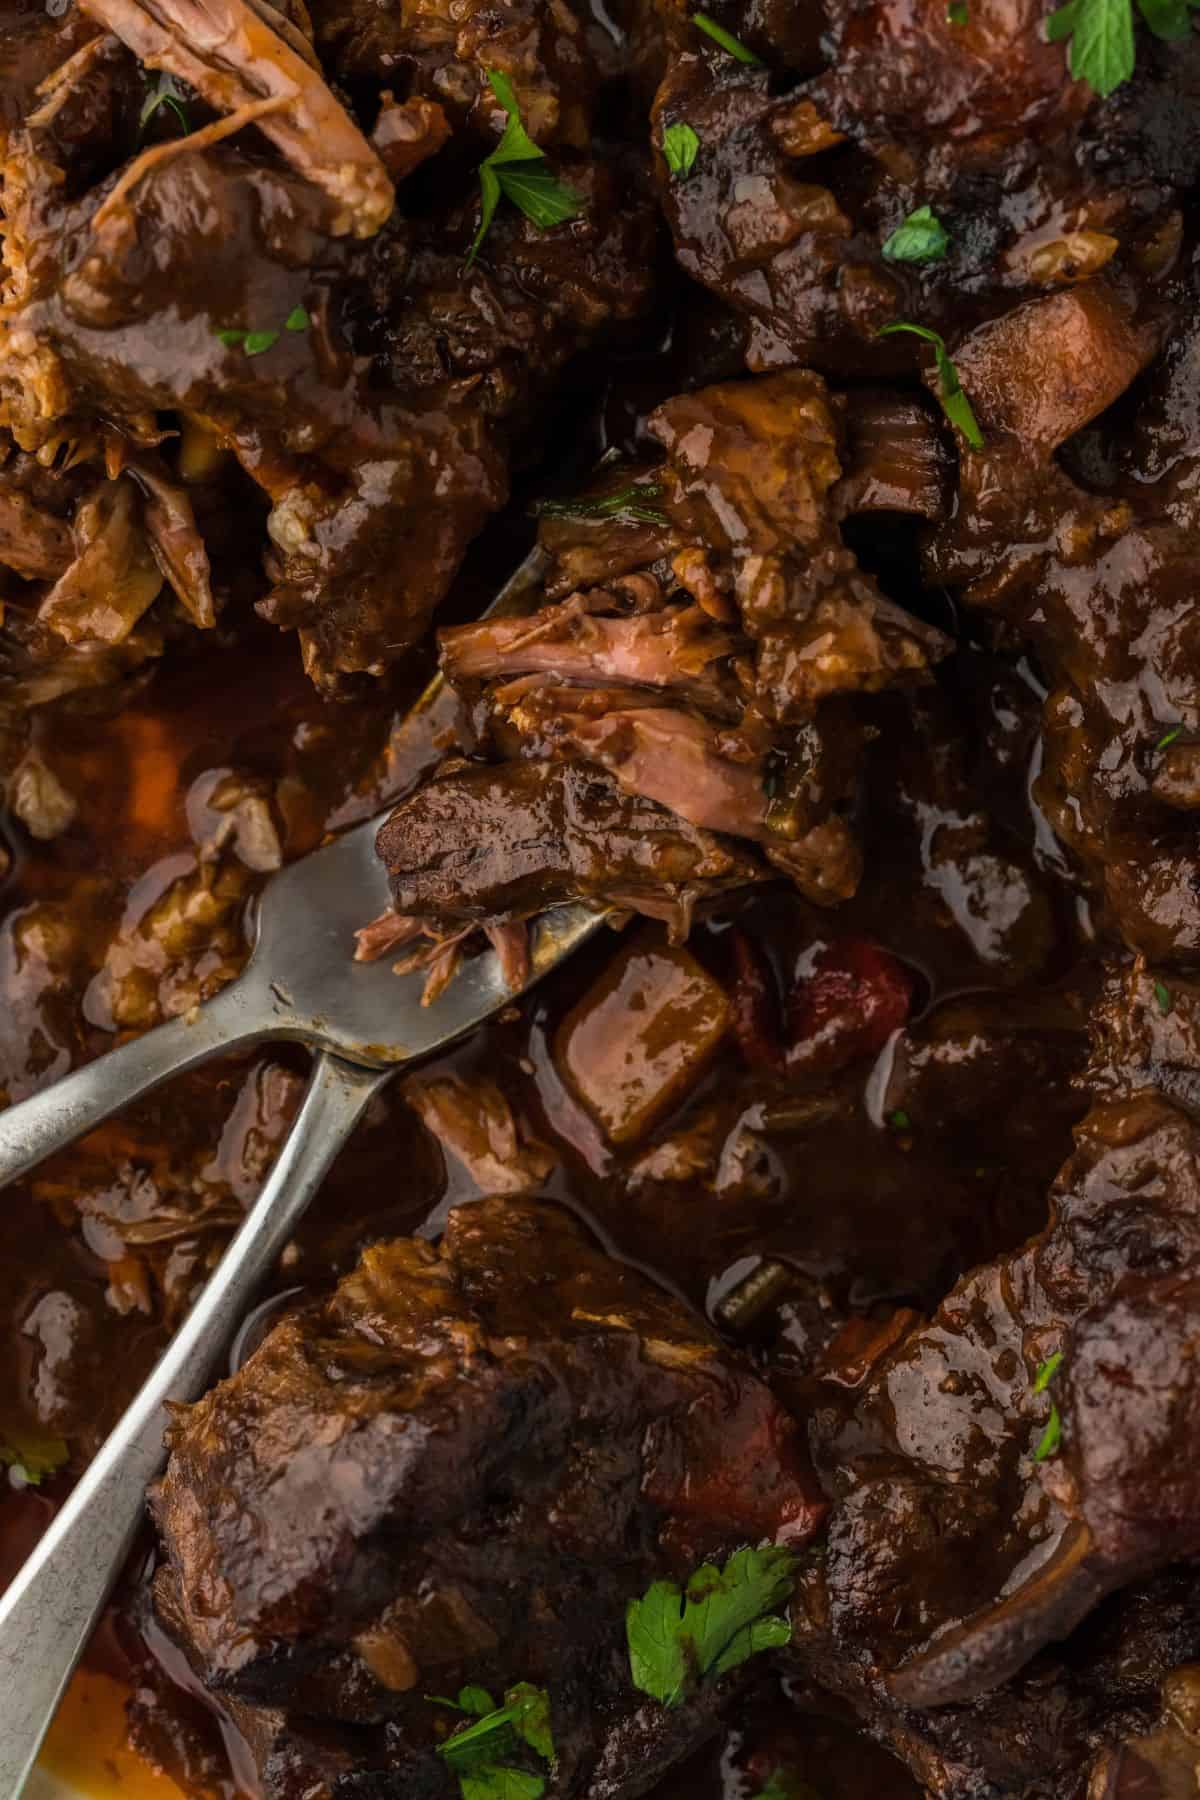 Close up of Jamaican oxtail stew, showing the tender meat and rich, dark gravy. Two forks are pulling apart a piece of oxtail